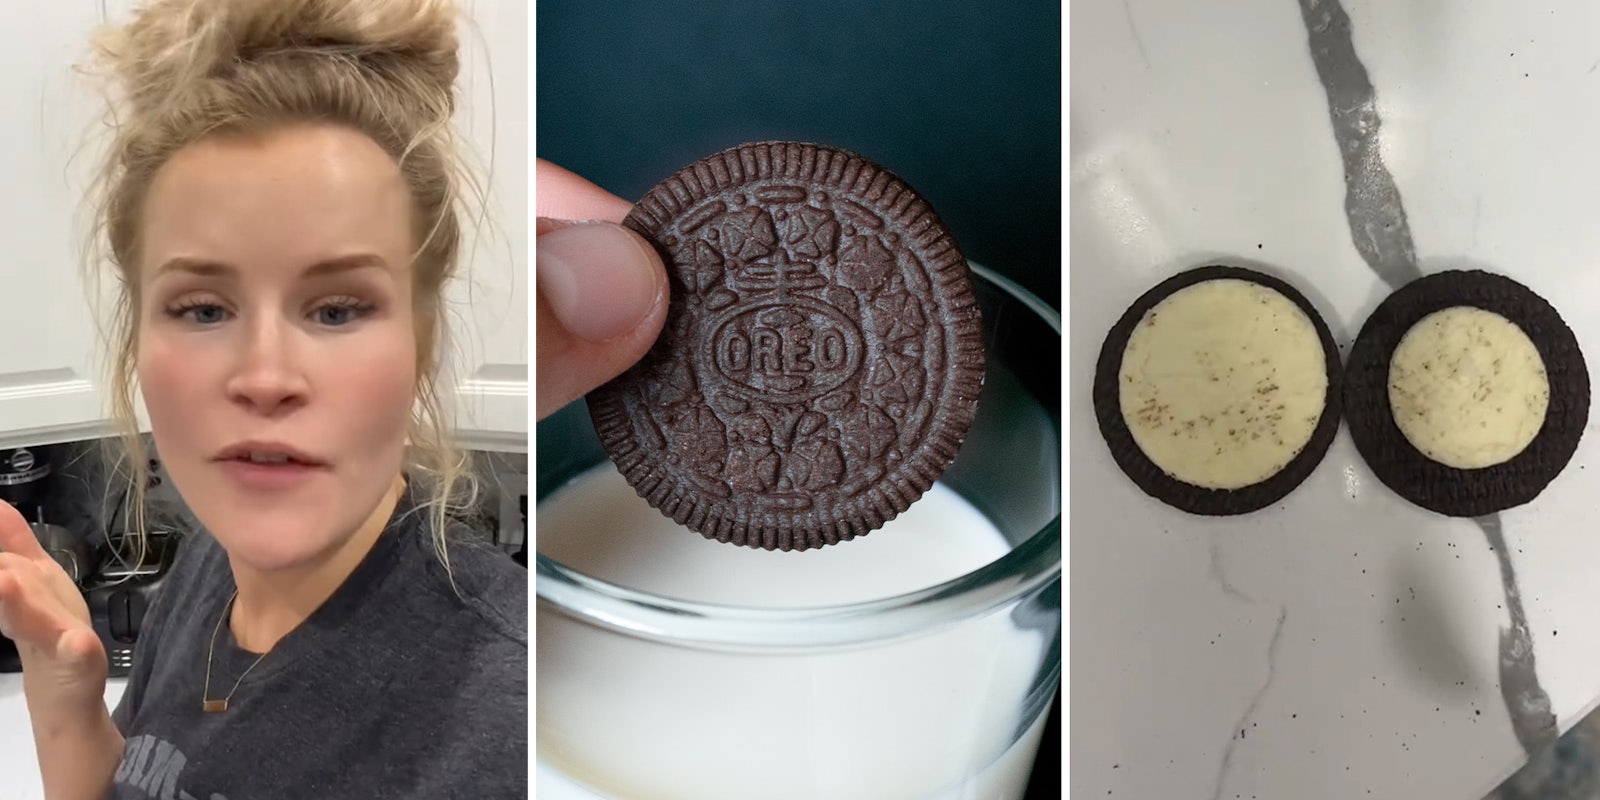 Woman claims Oreo has shrunk the amount of cream in its cookies